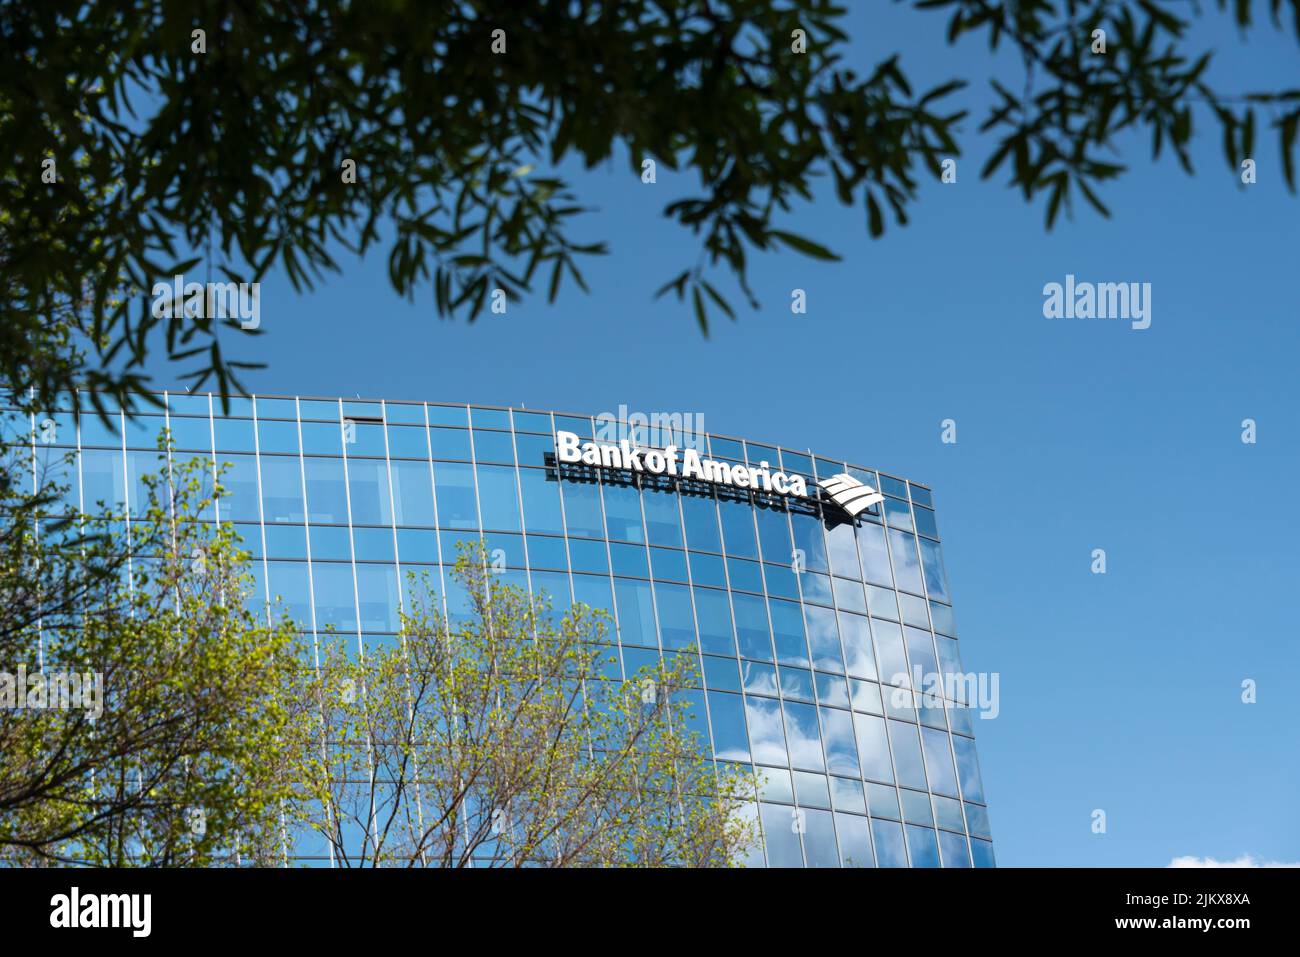 A view of the buildings with BANK of AMERICA signs on top, on blue sky background Stock Photo